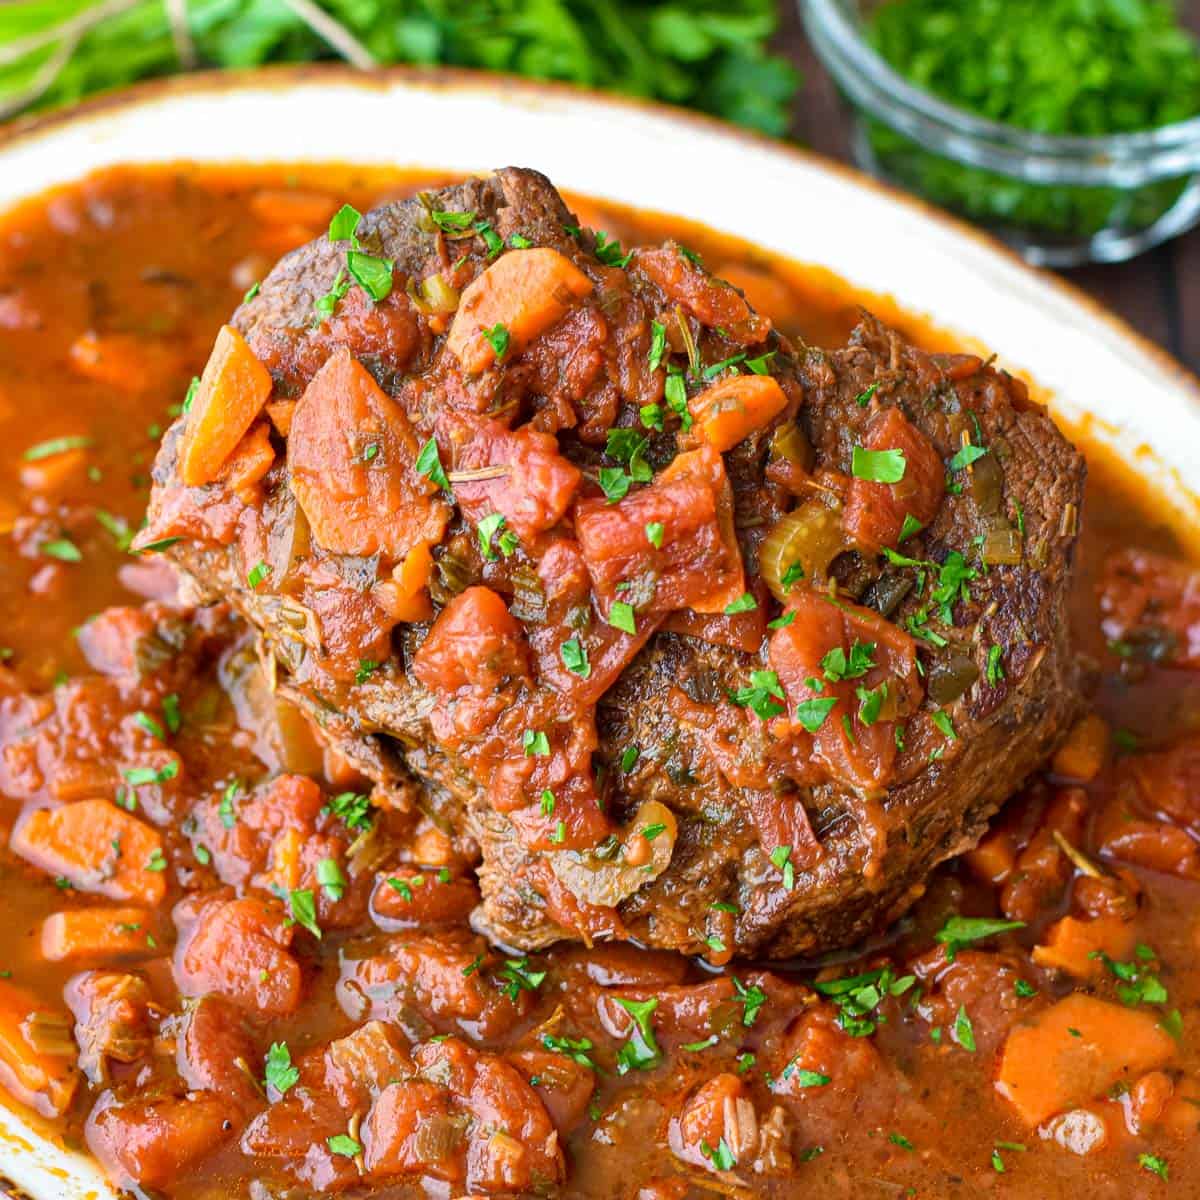 italian pot roast covered in tomato sauce on a platter in front of parsley